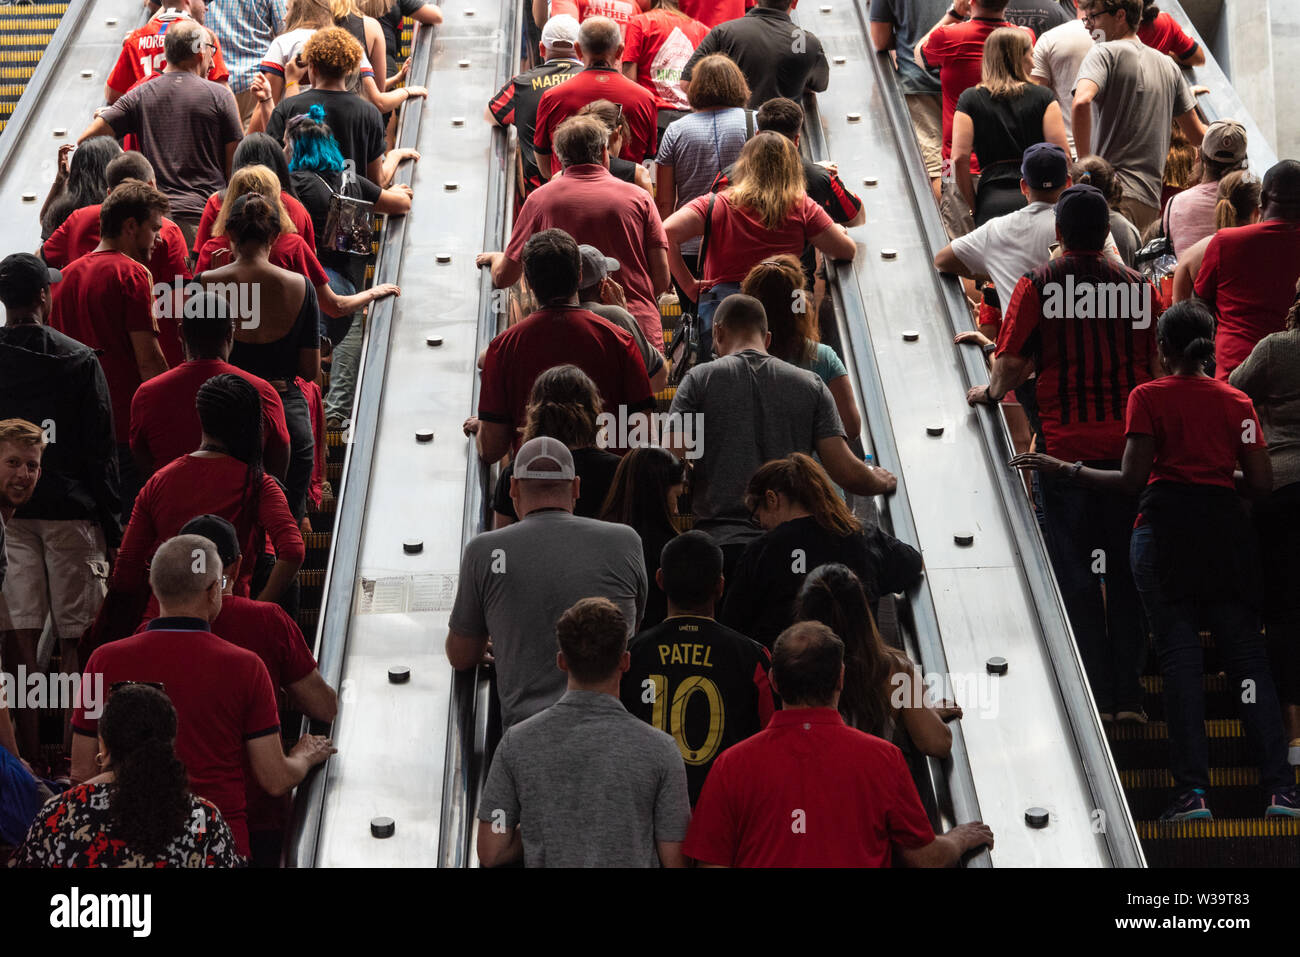 Atlanta United FC fans exiting the MARTA station for the MLS soccer game at the Mercedes-Benz Stadium in downtown Atlanta, Georgia. (USA) Stock Photo